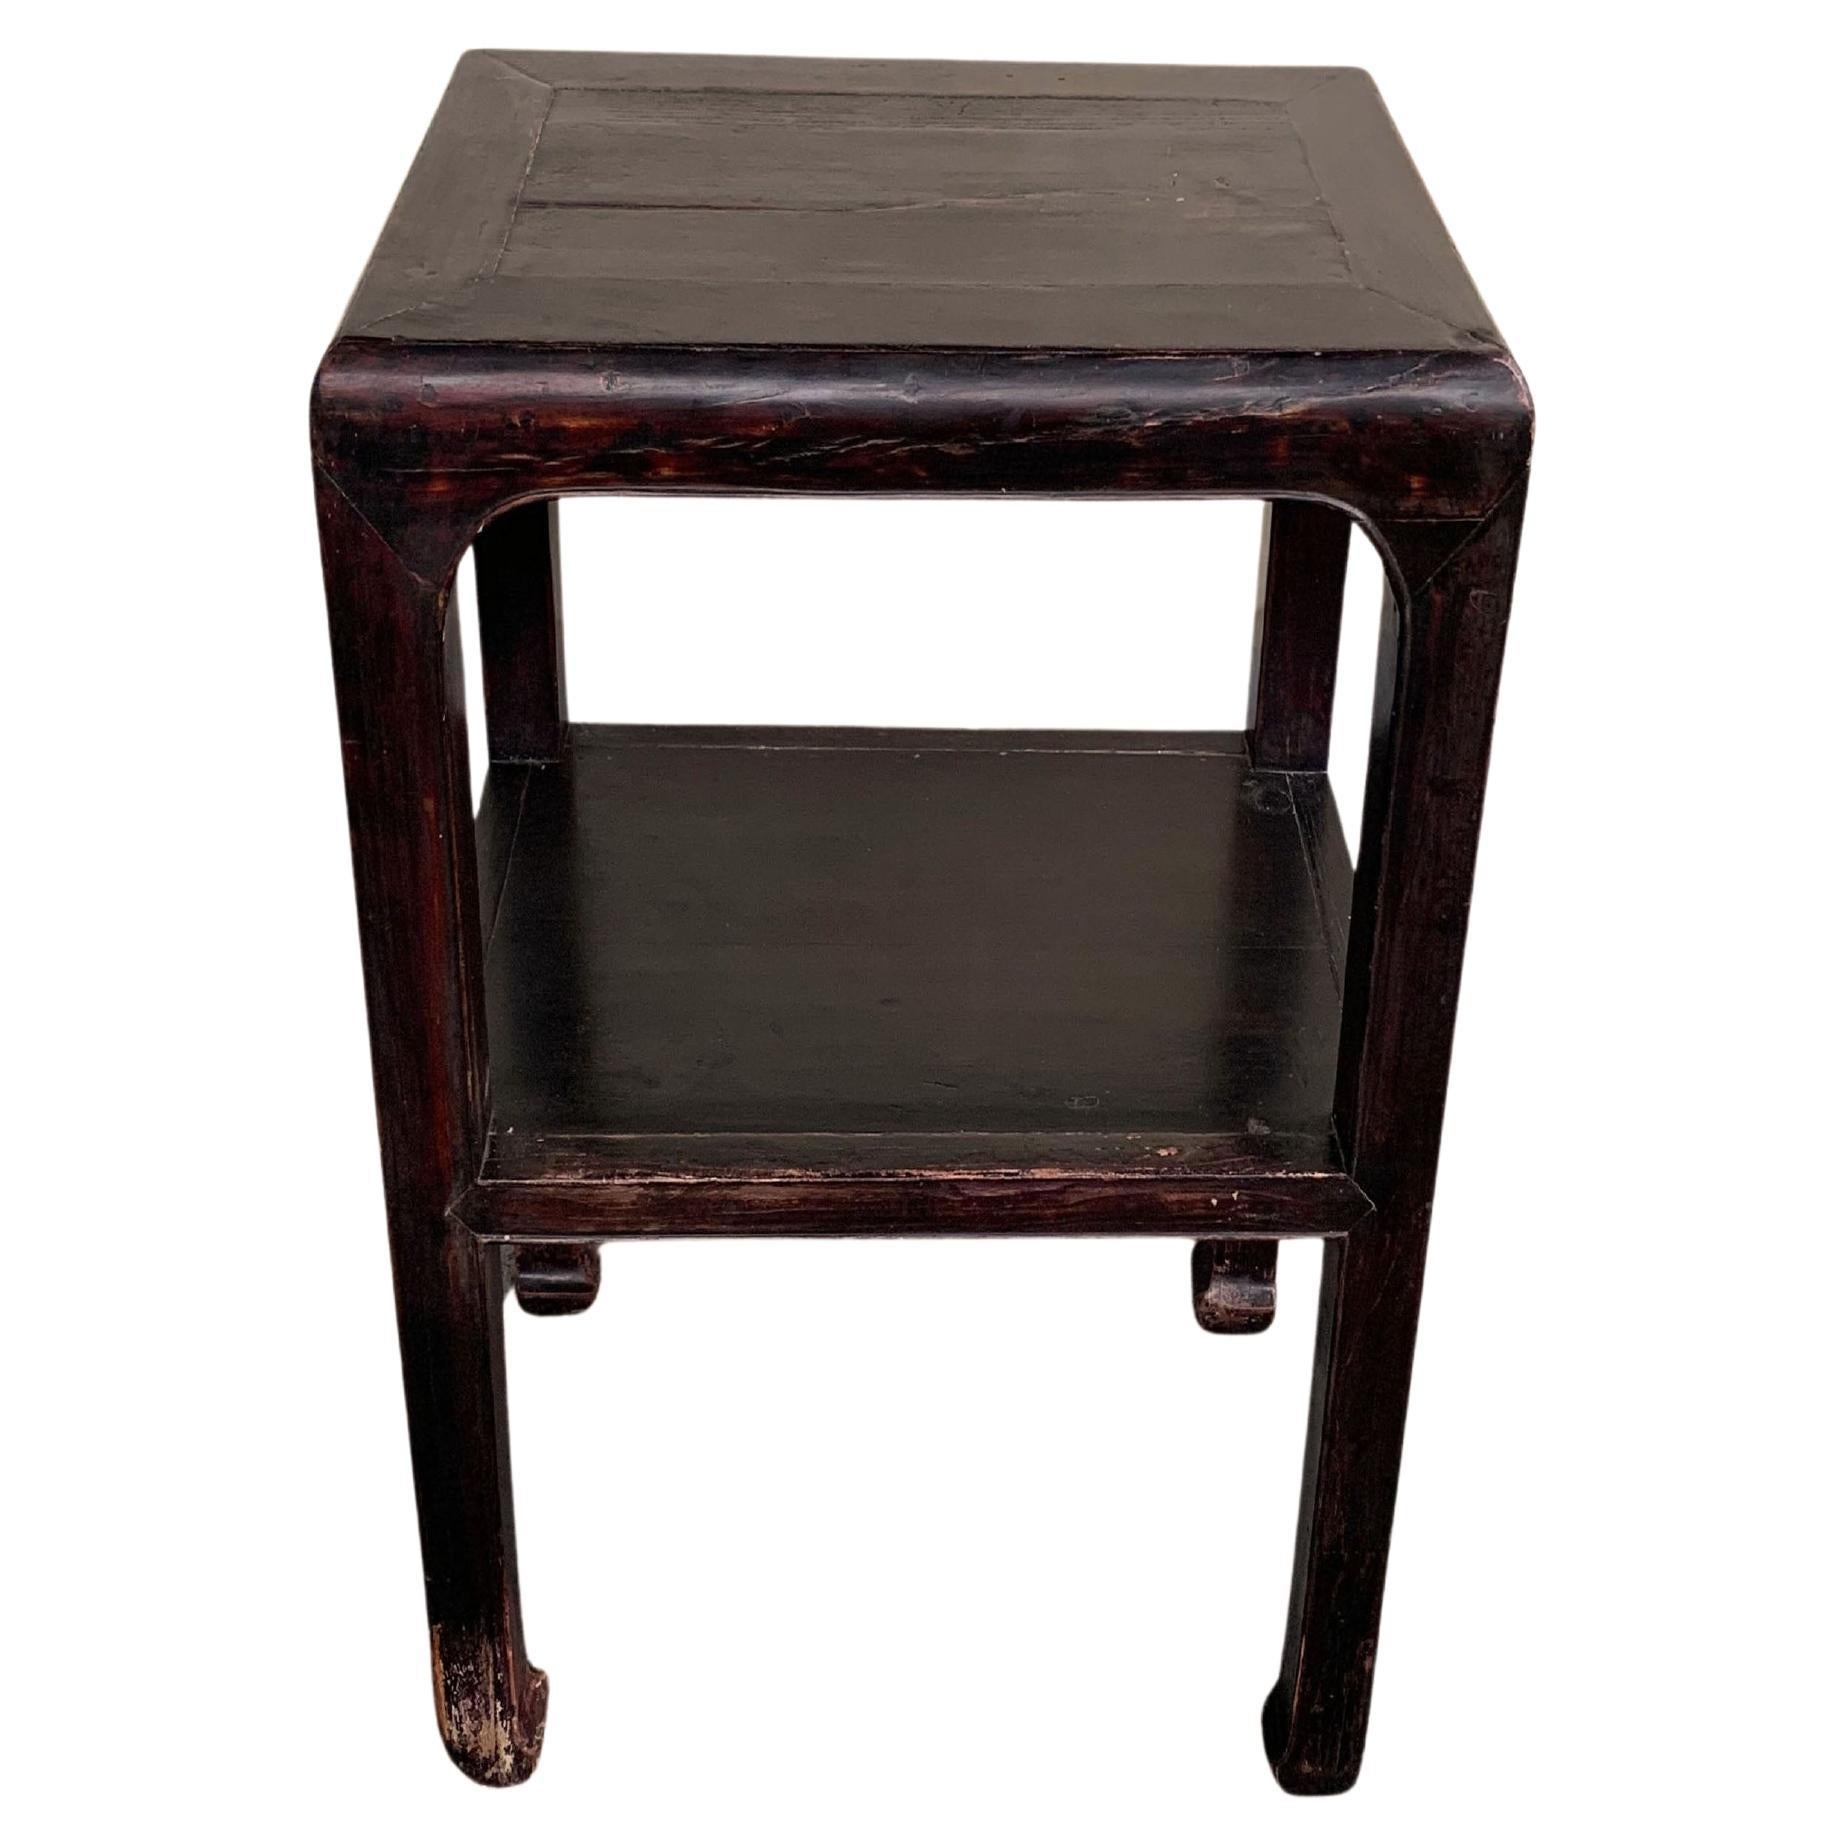 Chinese Lacquered Wooden Table with Curved Legs, c. 1950 For Sale